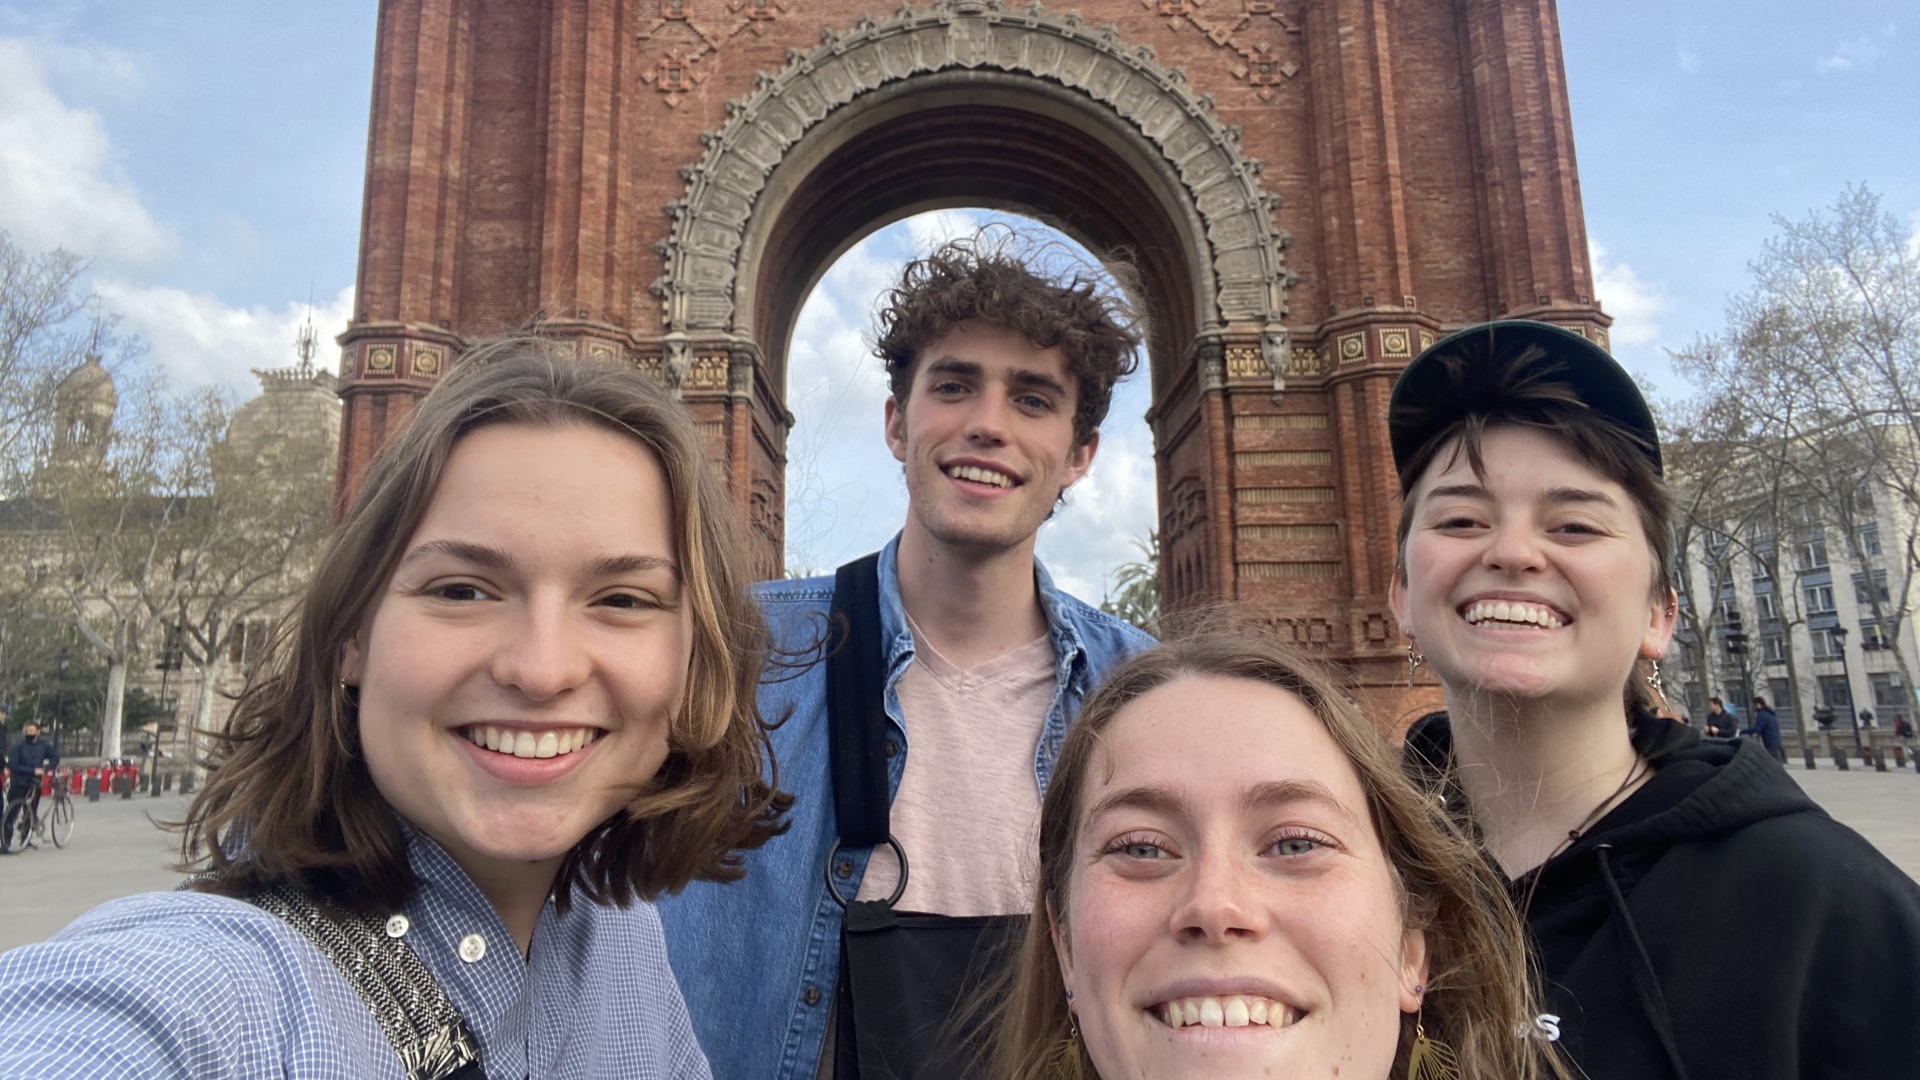 Sophie and classmates take a picture in front of an arched Spanish monument.